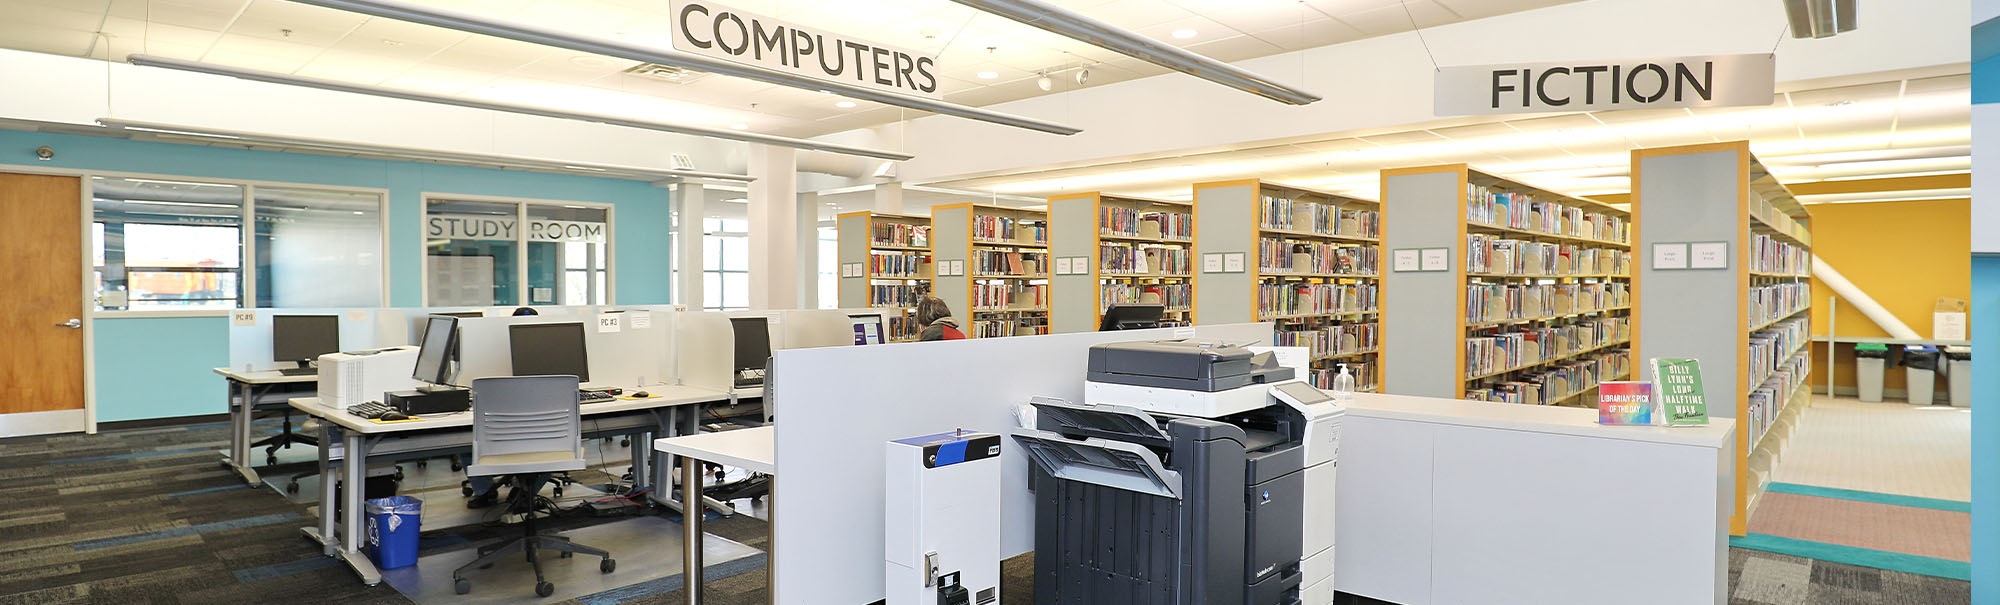 Computer section of library